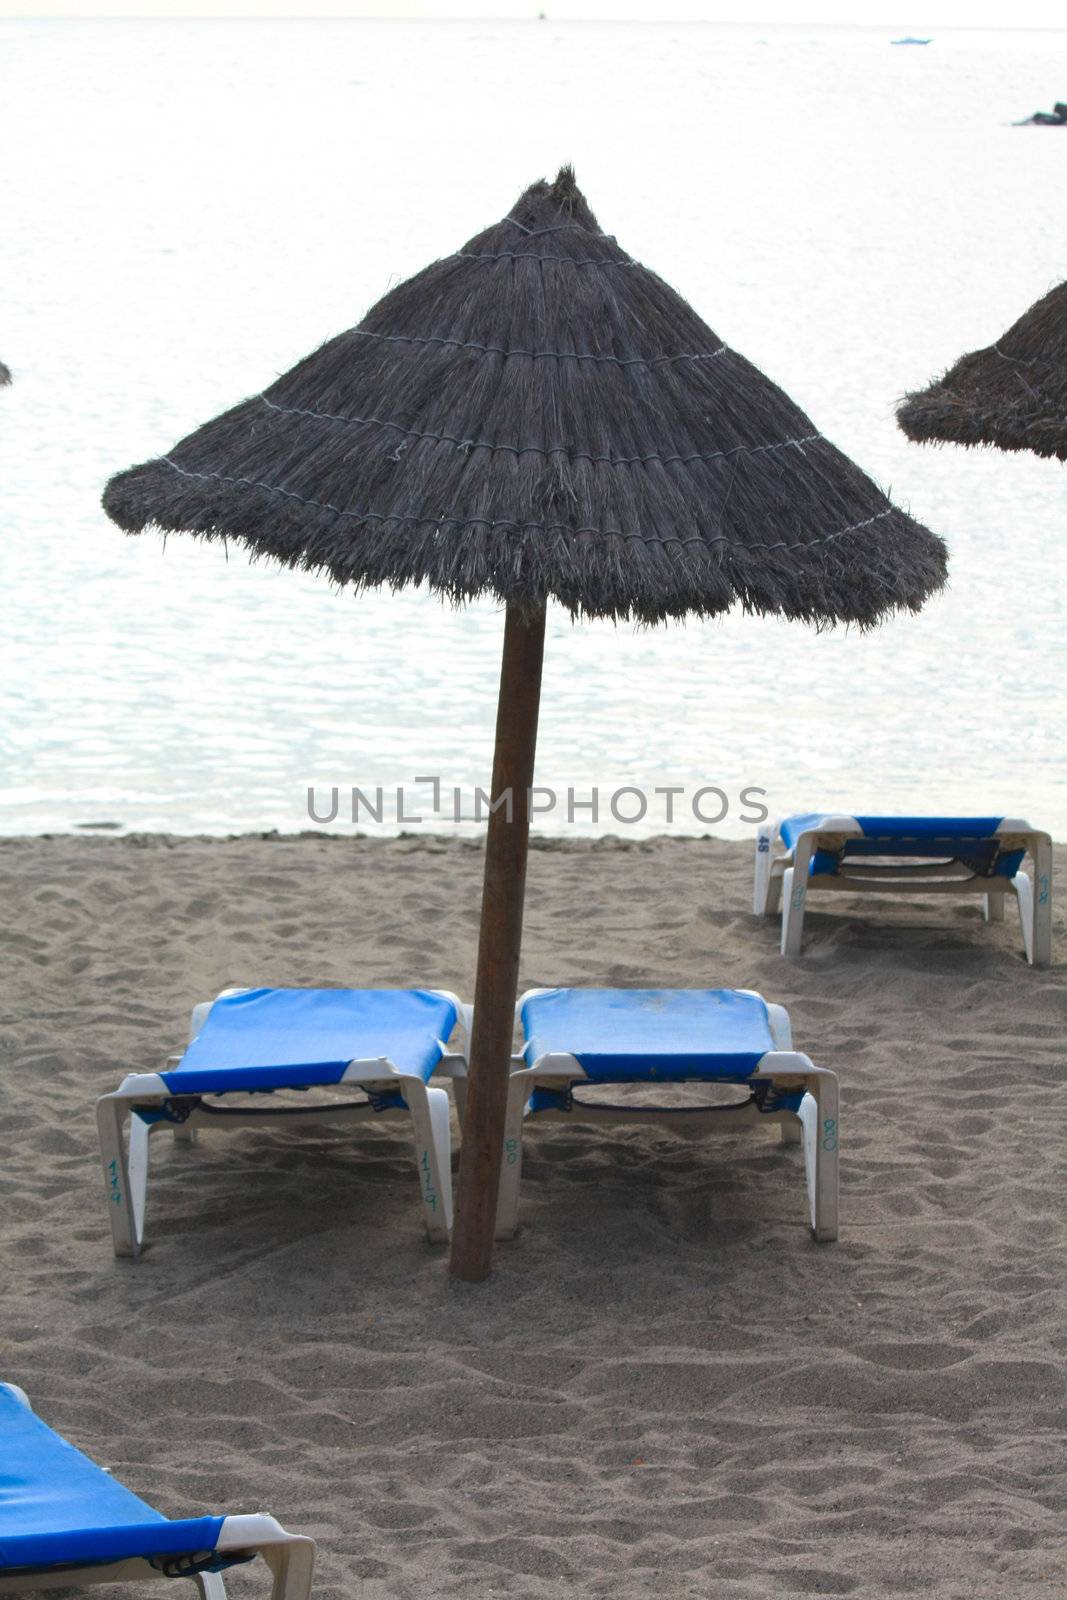 Two beach chairs and an umbrella